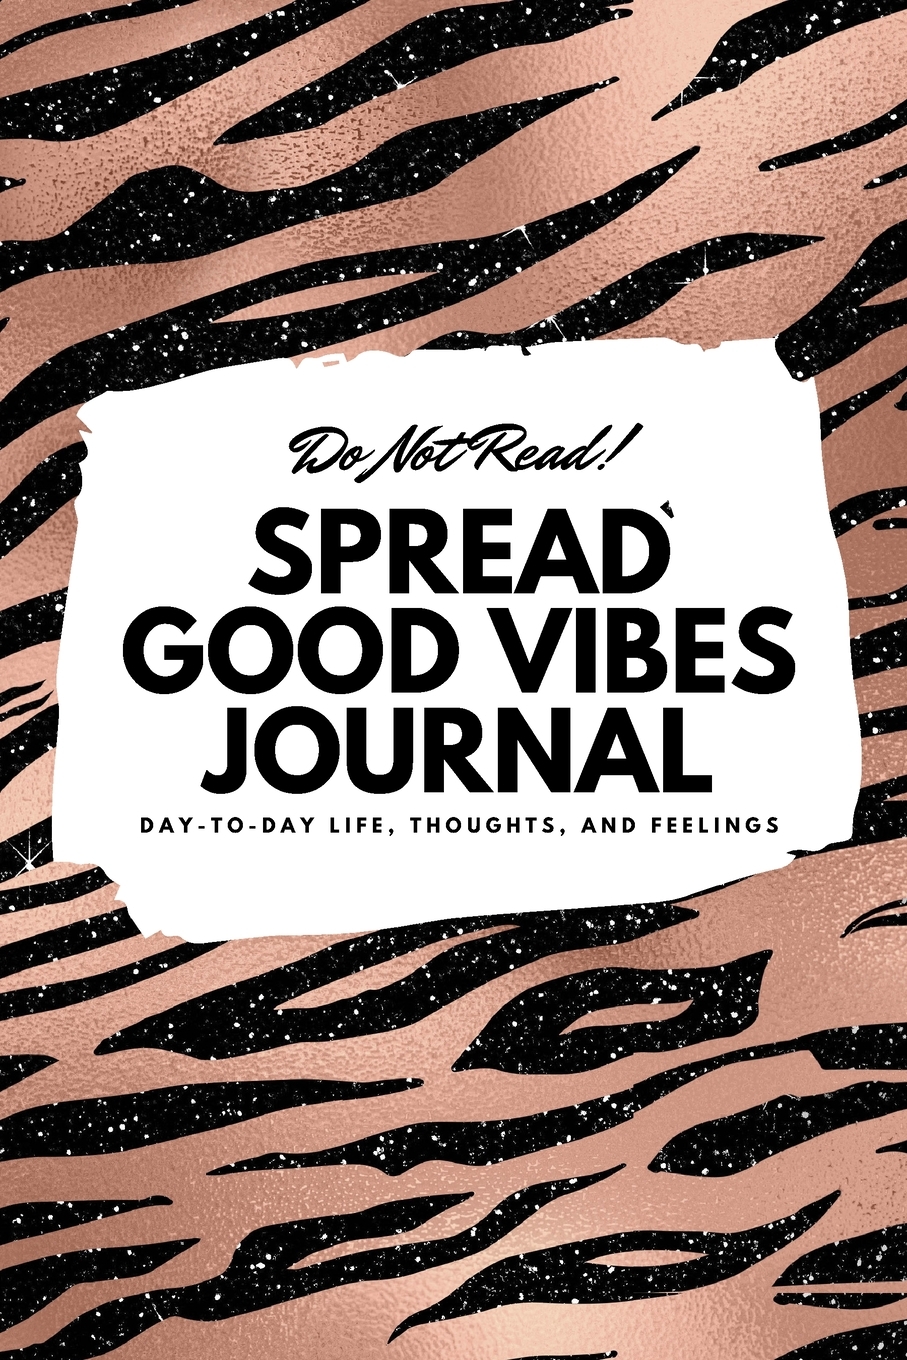 6x9 Blank Journal: Do Not Read! Spread Good Vibes Journal - Small Blank Journal - 6x9 Blank Journal (Softcover Journal / Notebook / Sketchbook / Diary) (Series #46) (Paperback) - image 1 of 1